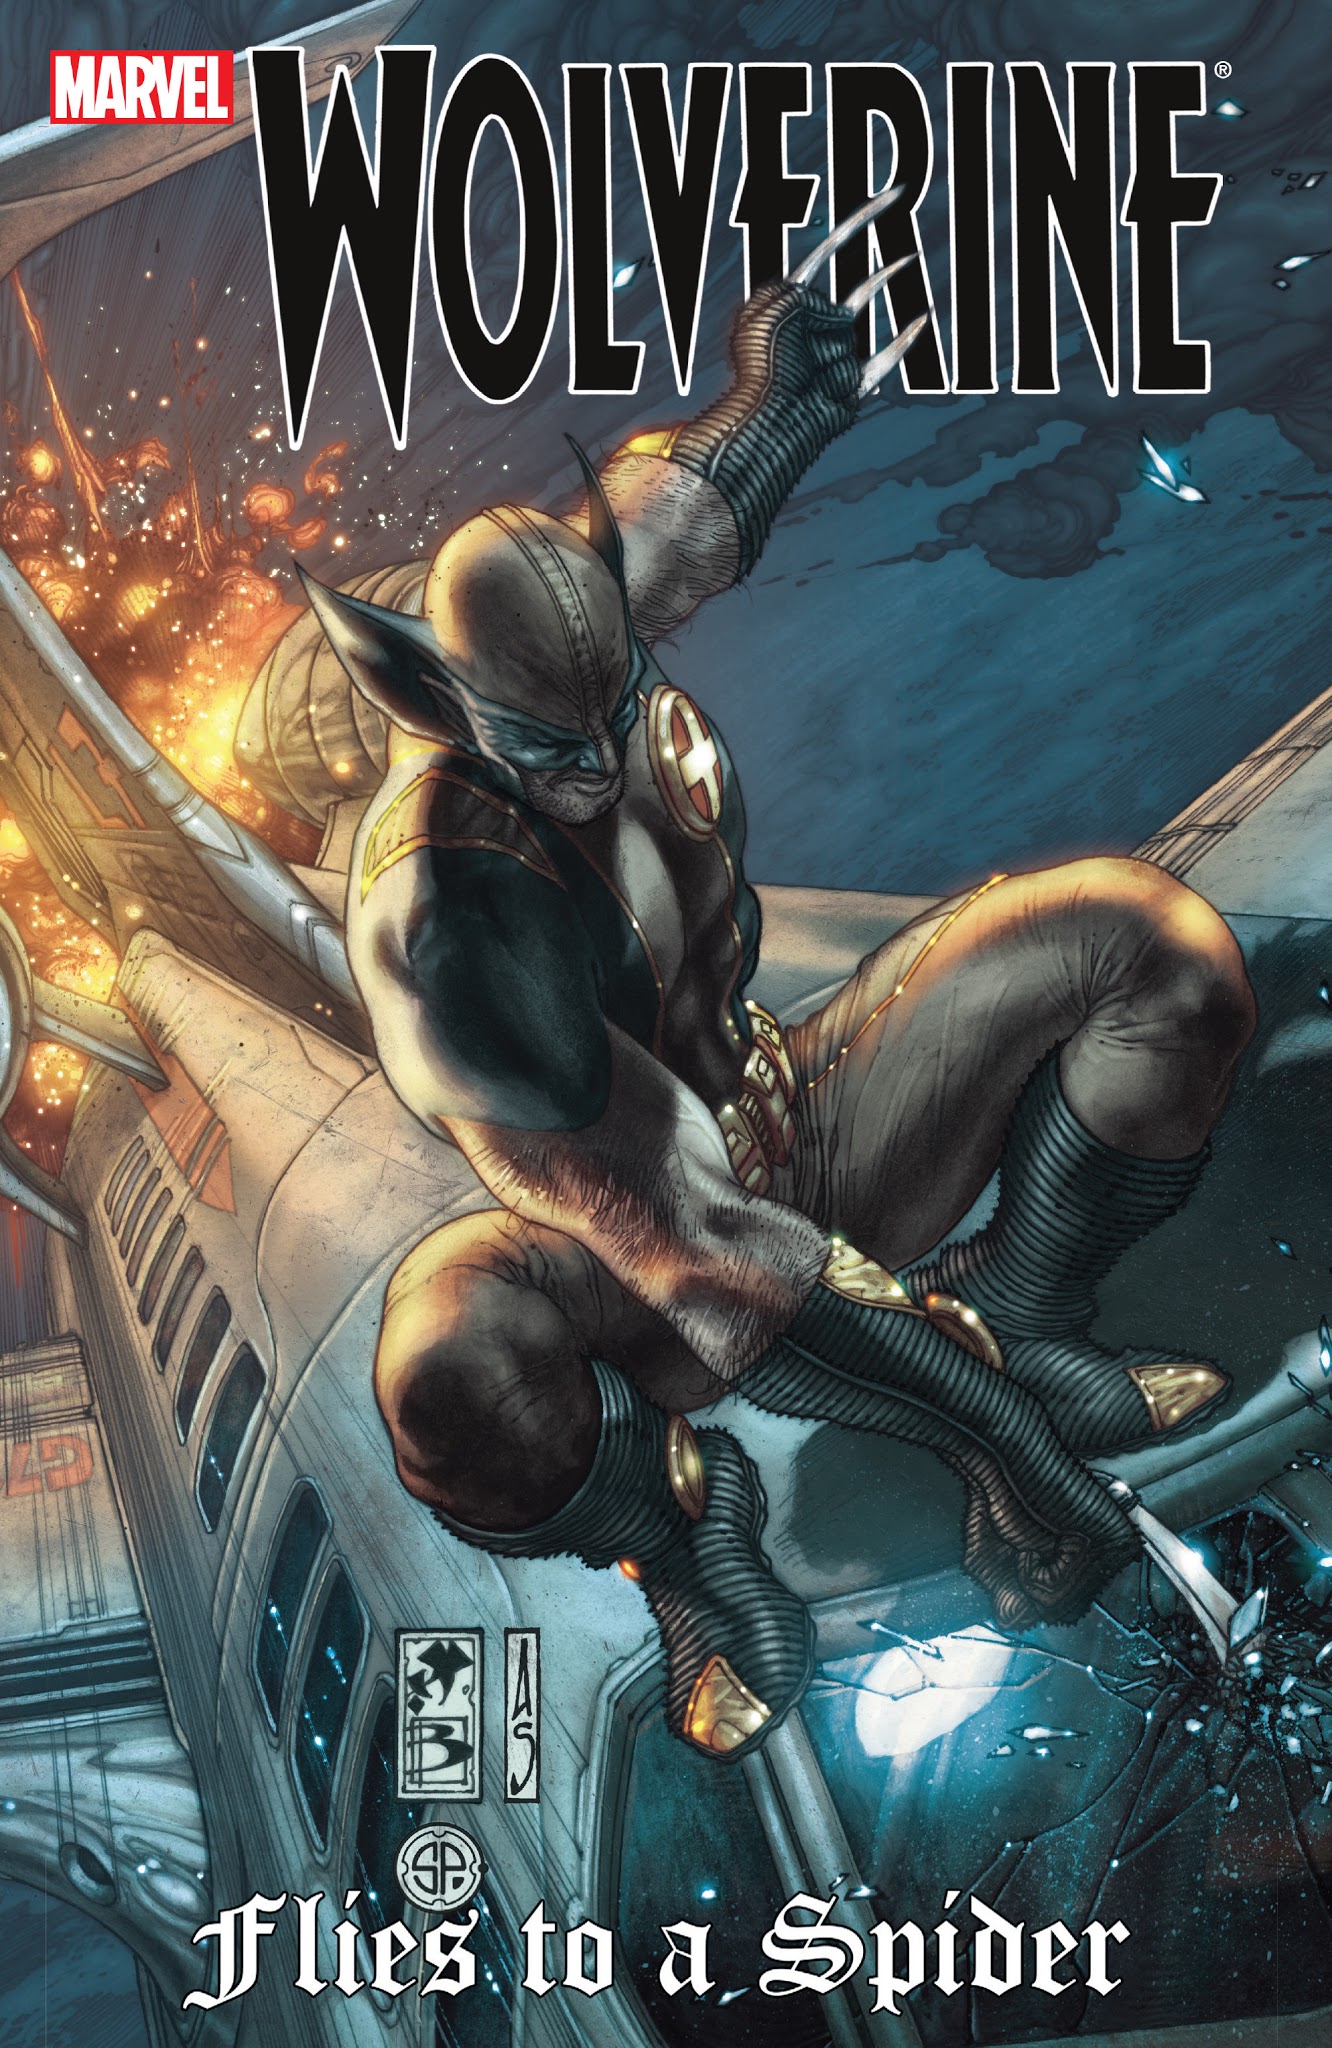 Read online Wolverine: Flies to a Spider comic -  Issue # TPB - 1